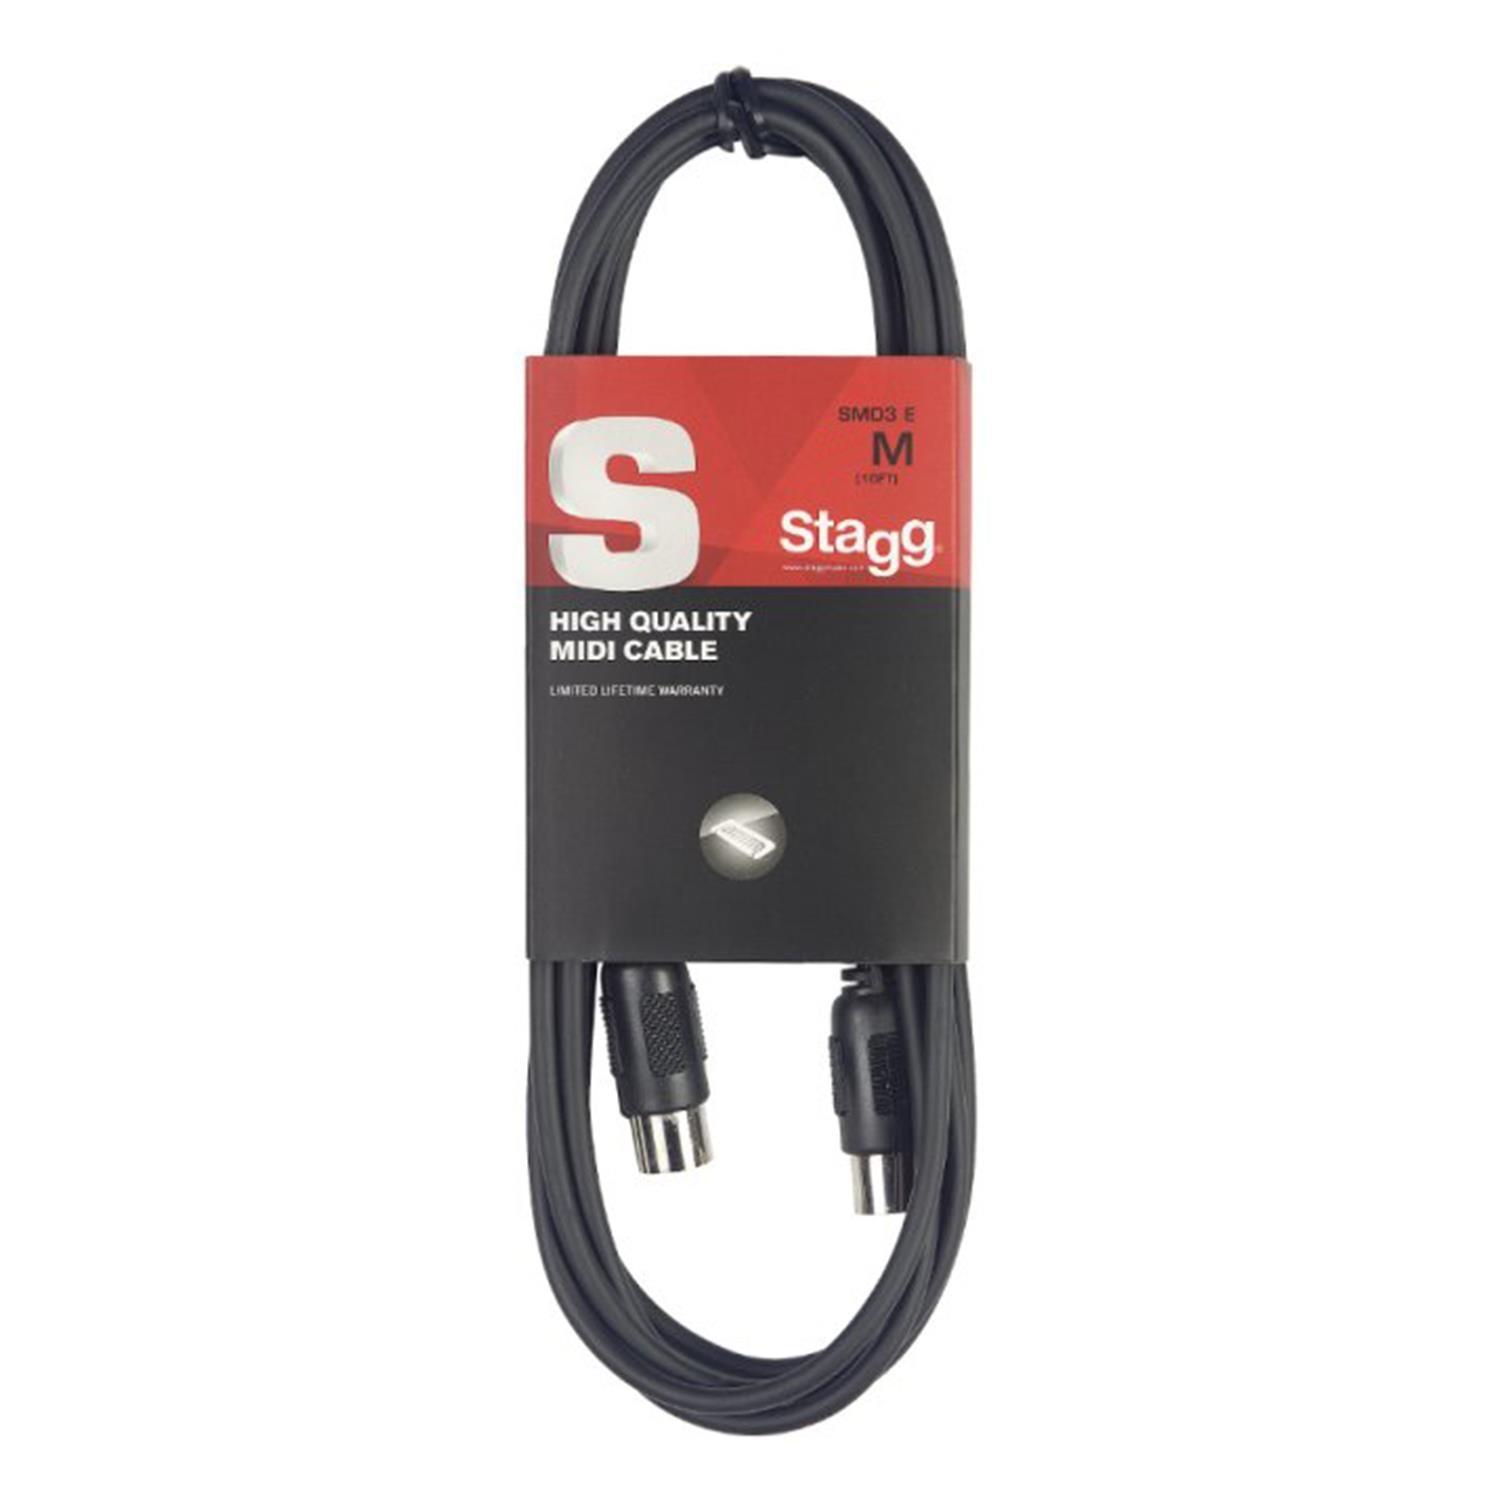 Stagg 3m 5 Pin Midi DIN Cable - DY Pro Audio